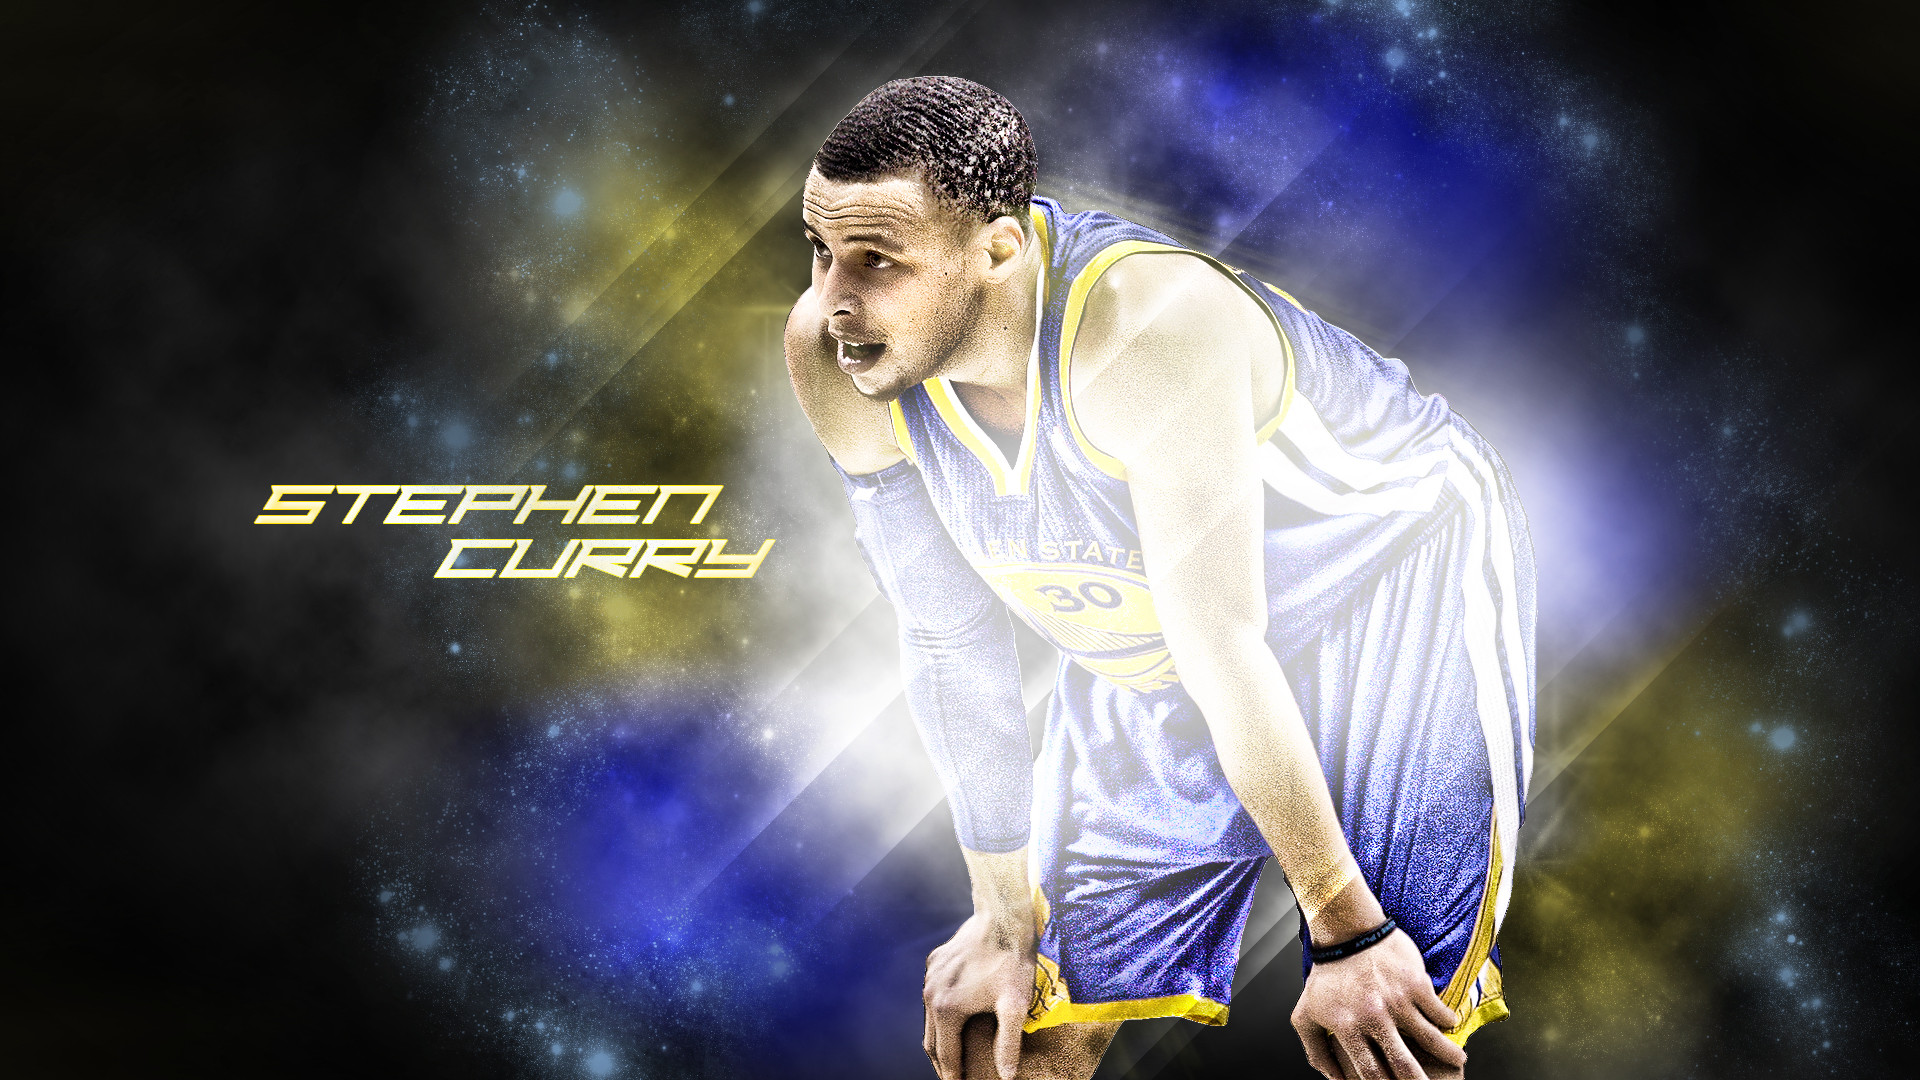 1920x1080 Stephen Curry; Designed by Ryan Gray | Basketball Related | Pinterest |  Stephen curry, Golden state and Golden state warriors